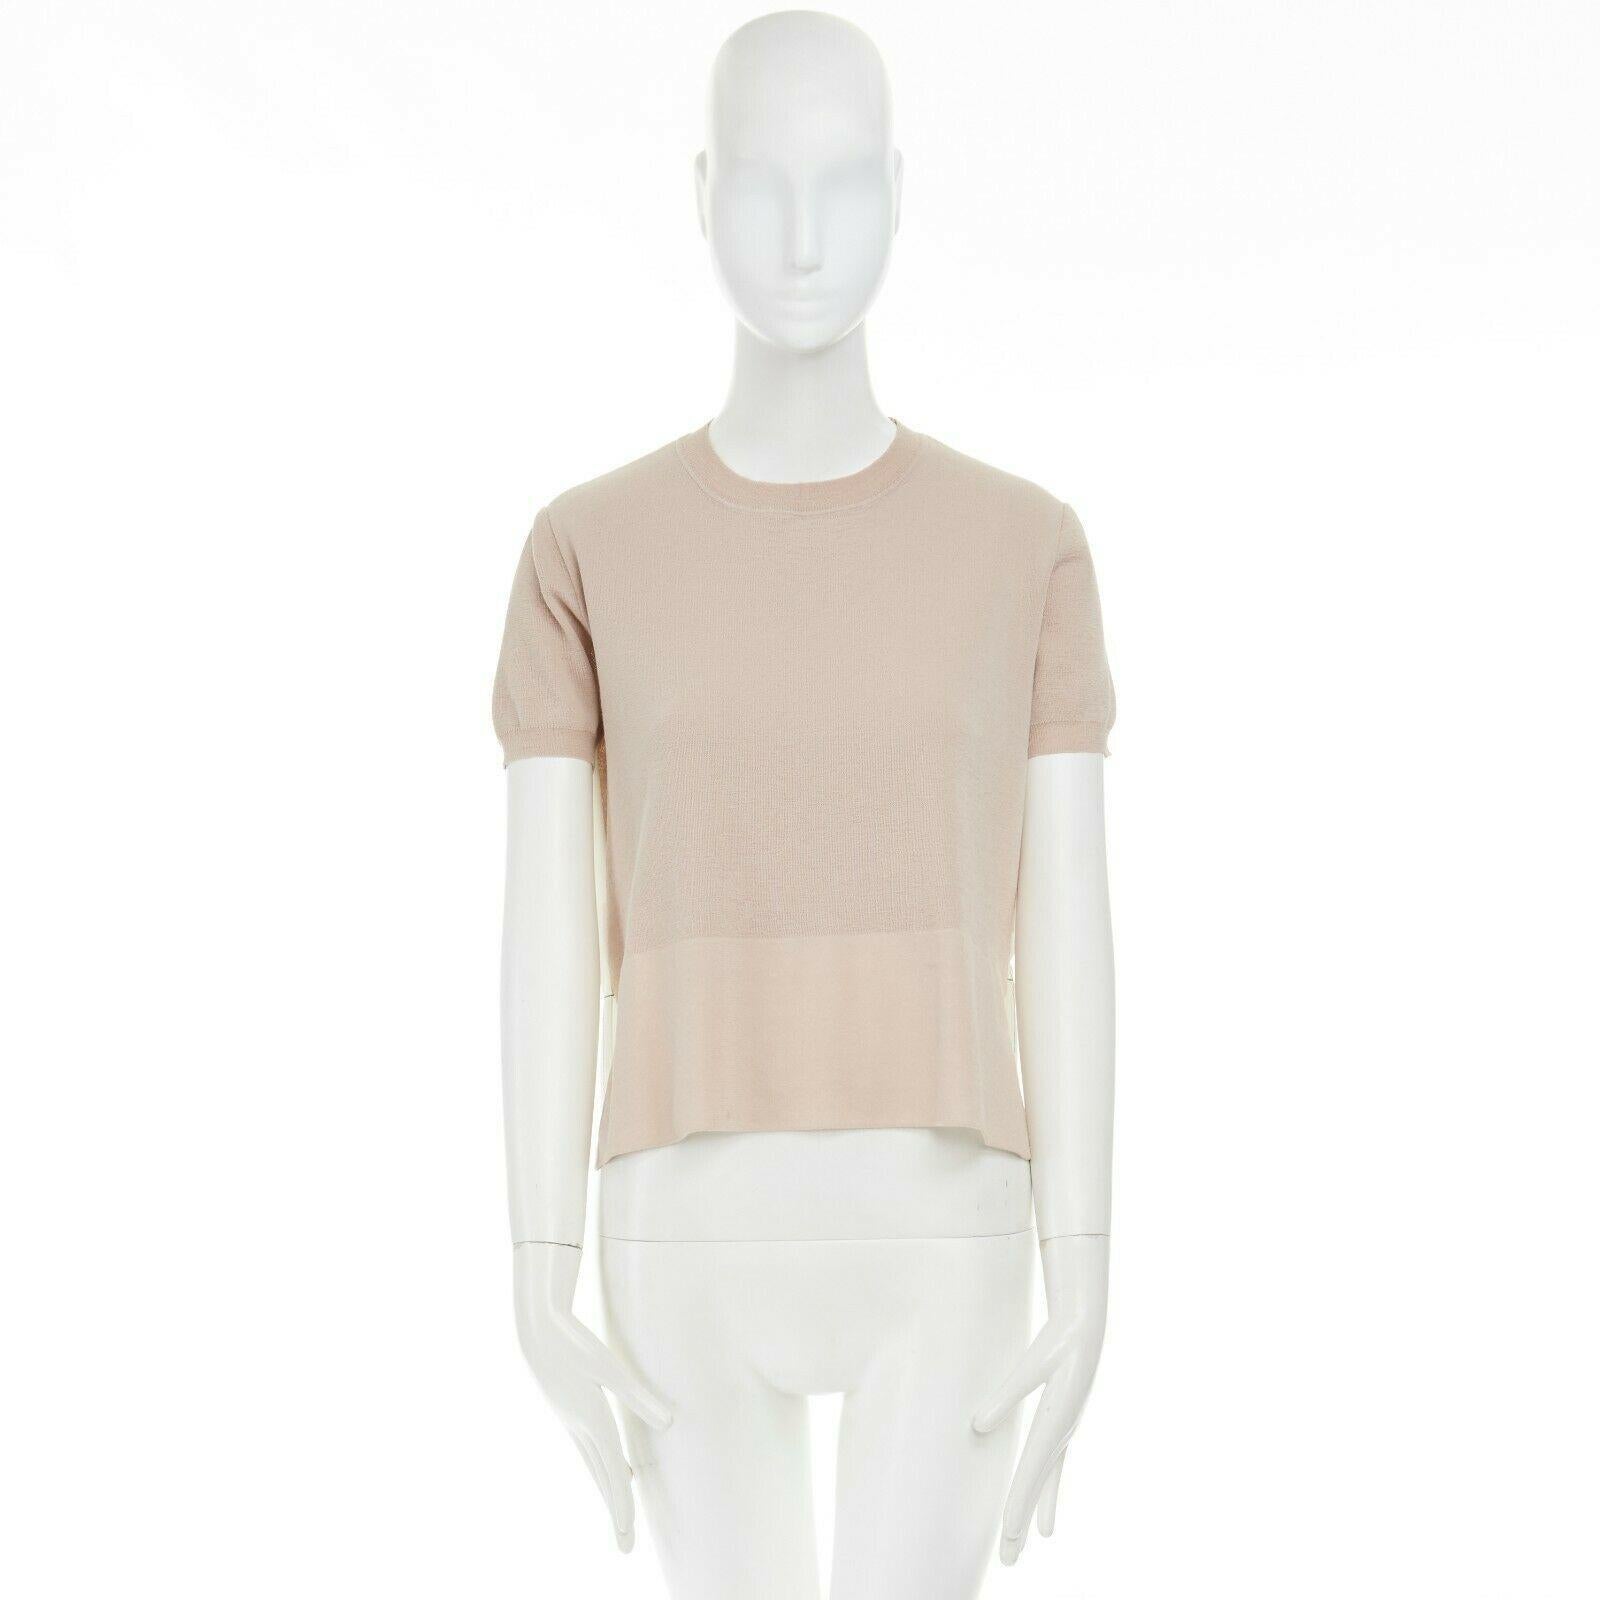 MARNI nude knitted front contrast white striped back short sleeve sweater top XS 
Reference: LNKO/A01063 
Brand: Marni 
Color: Pink 
Pattern: Striped 
Extra Detail: Light beige. Contrasting color at front hem. Round neck. Short sleeve. Contrast back